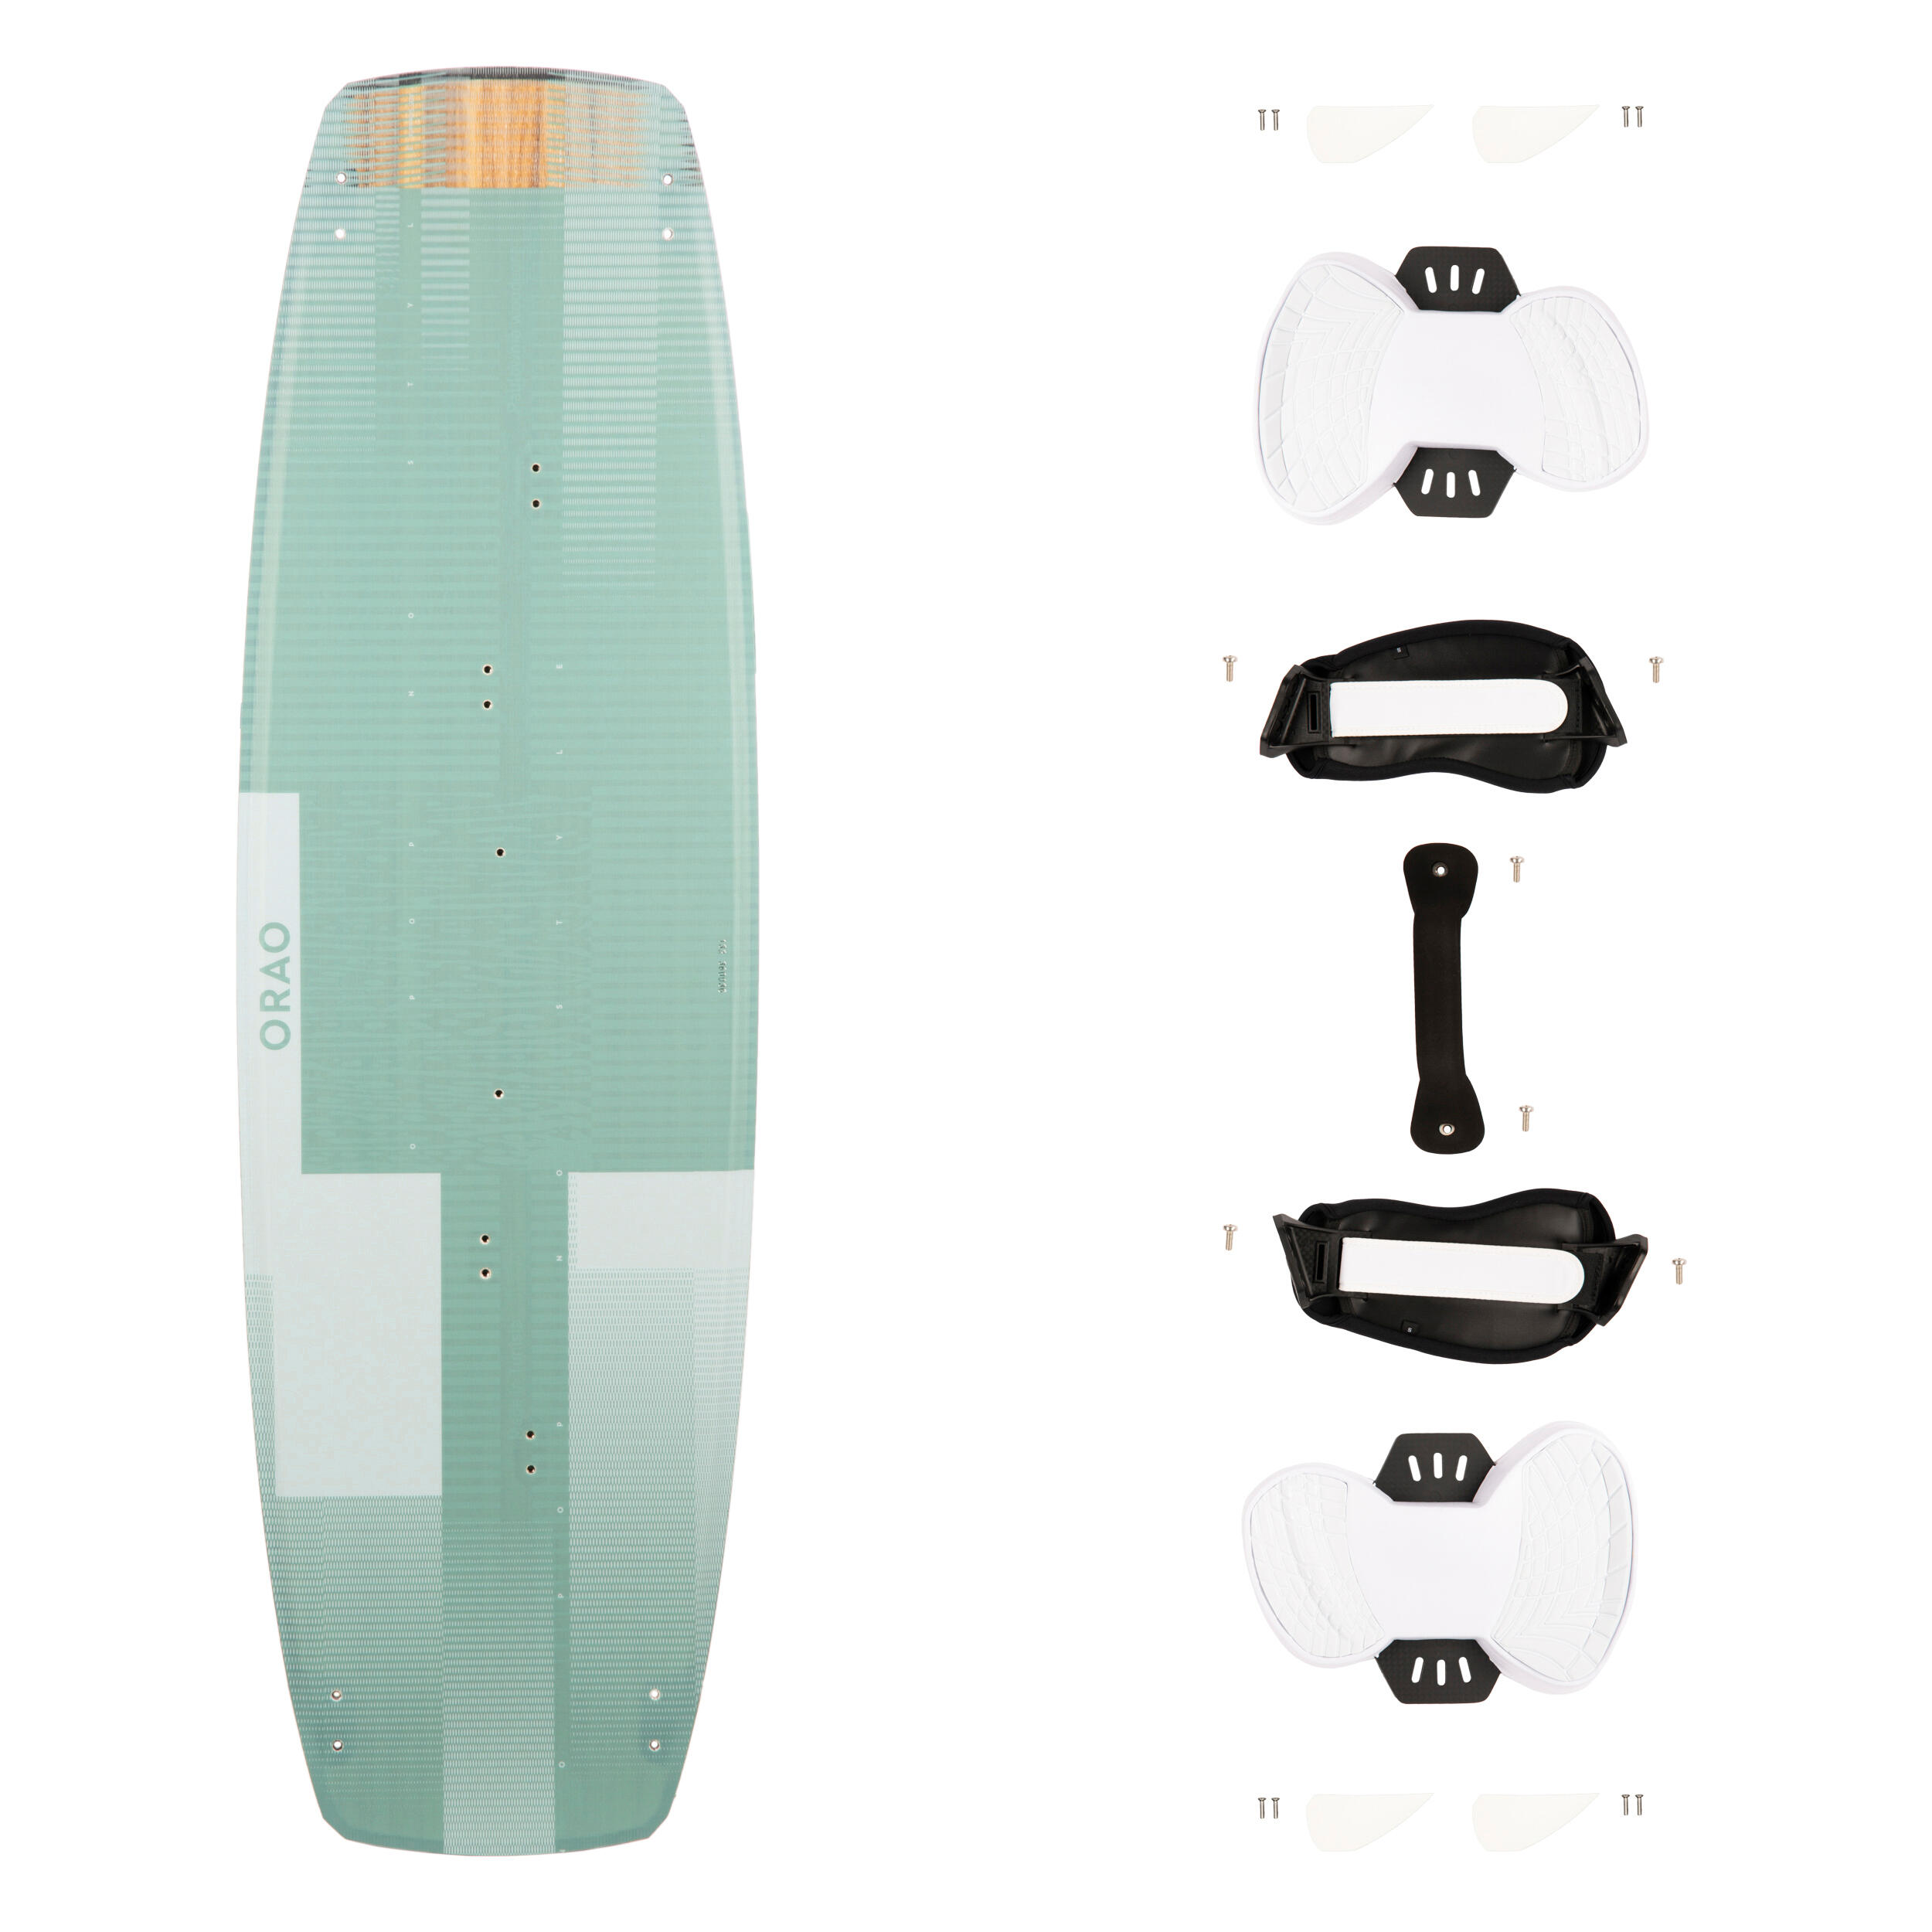 ORAO Twintip carbon kitesurf board 132 x 39 cm (pads and straps included) - TT500